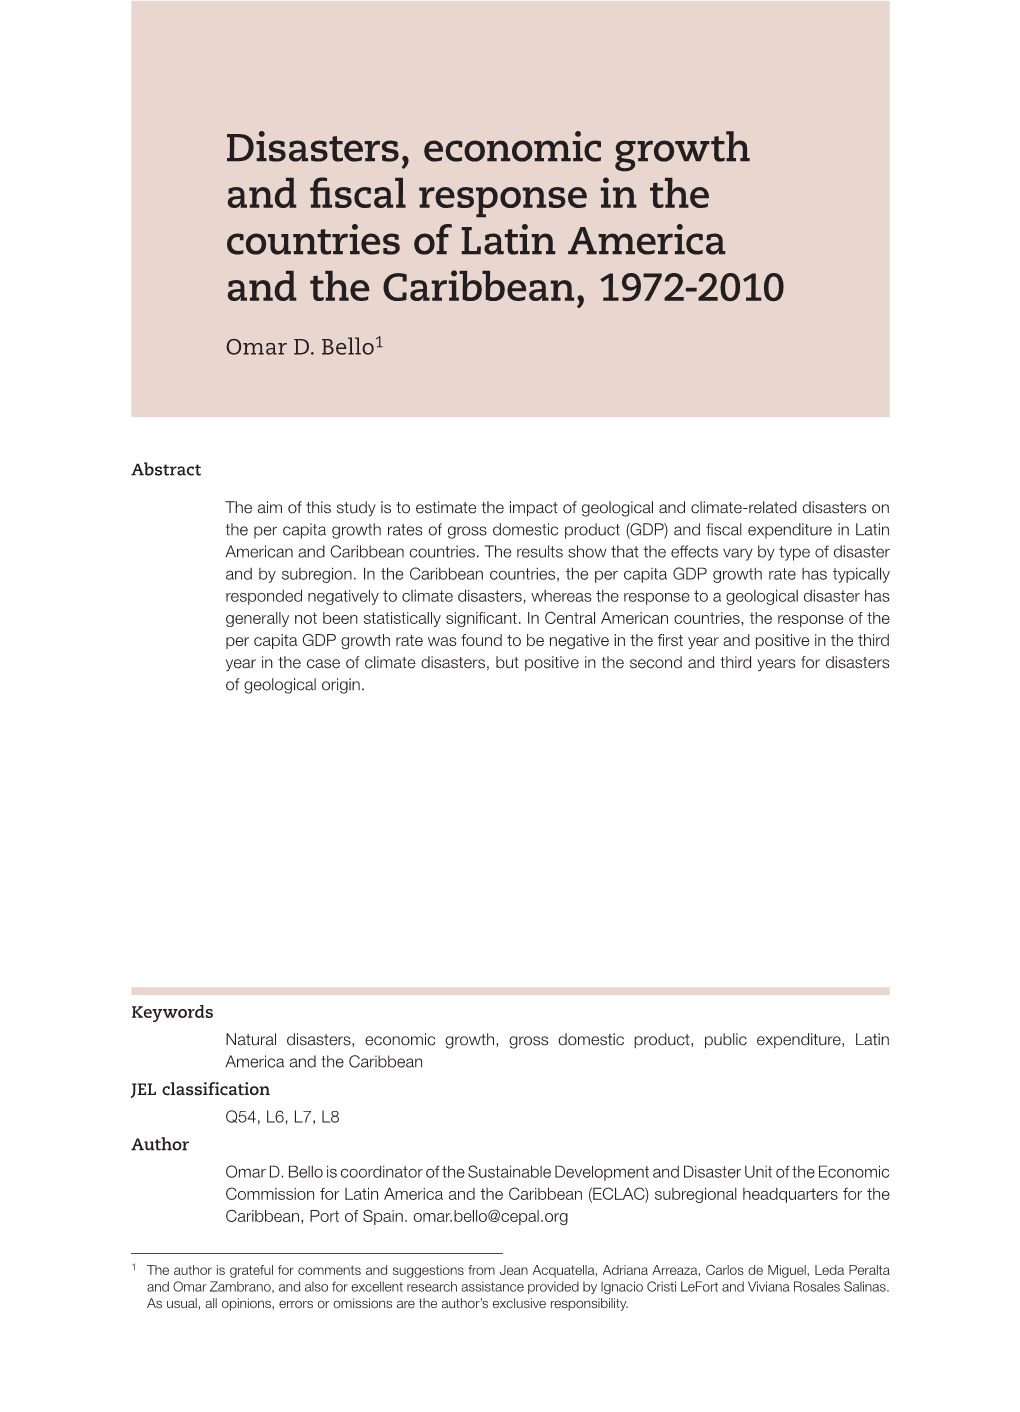 Disasters, Economic Growth and Fiscal Response in the Countries of Latin